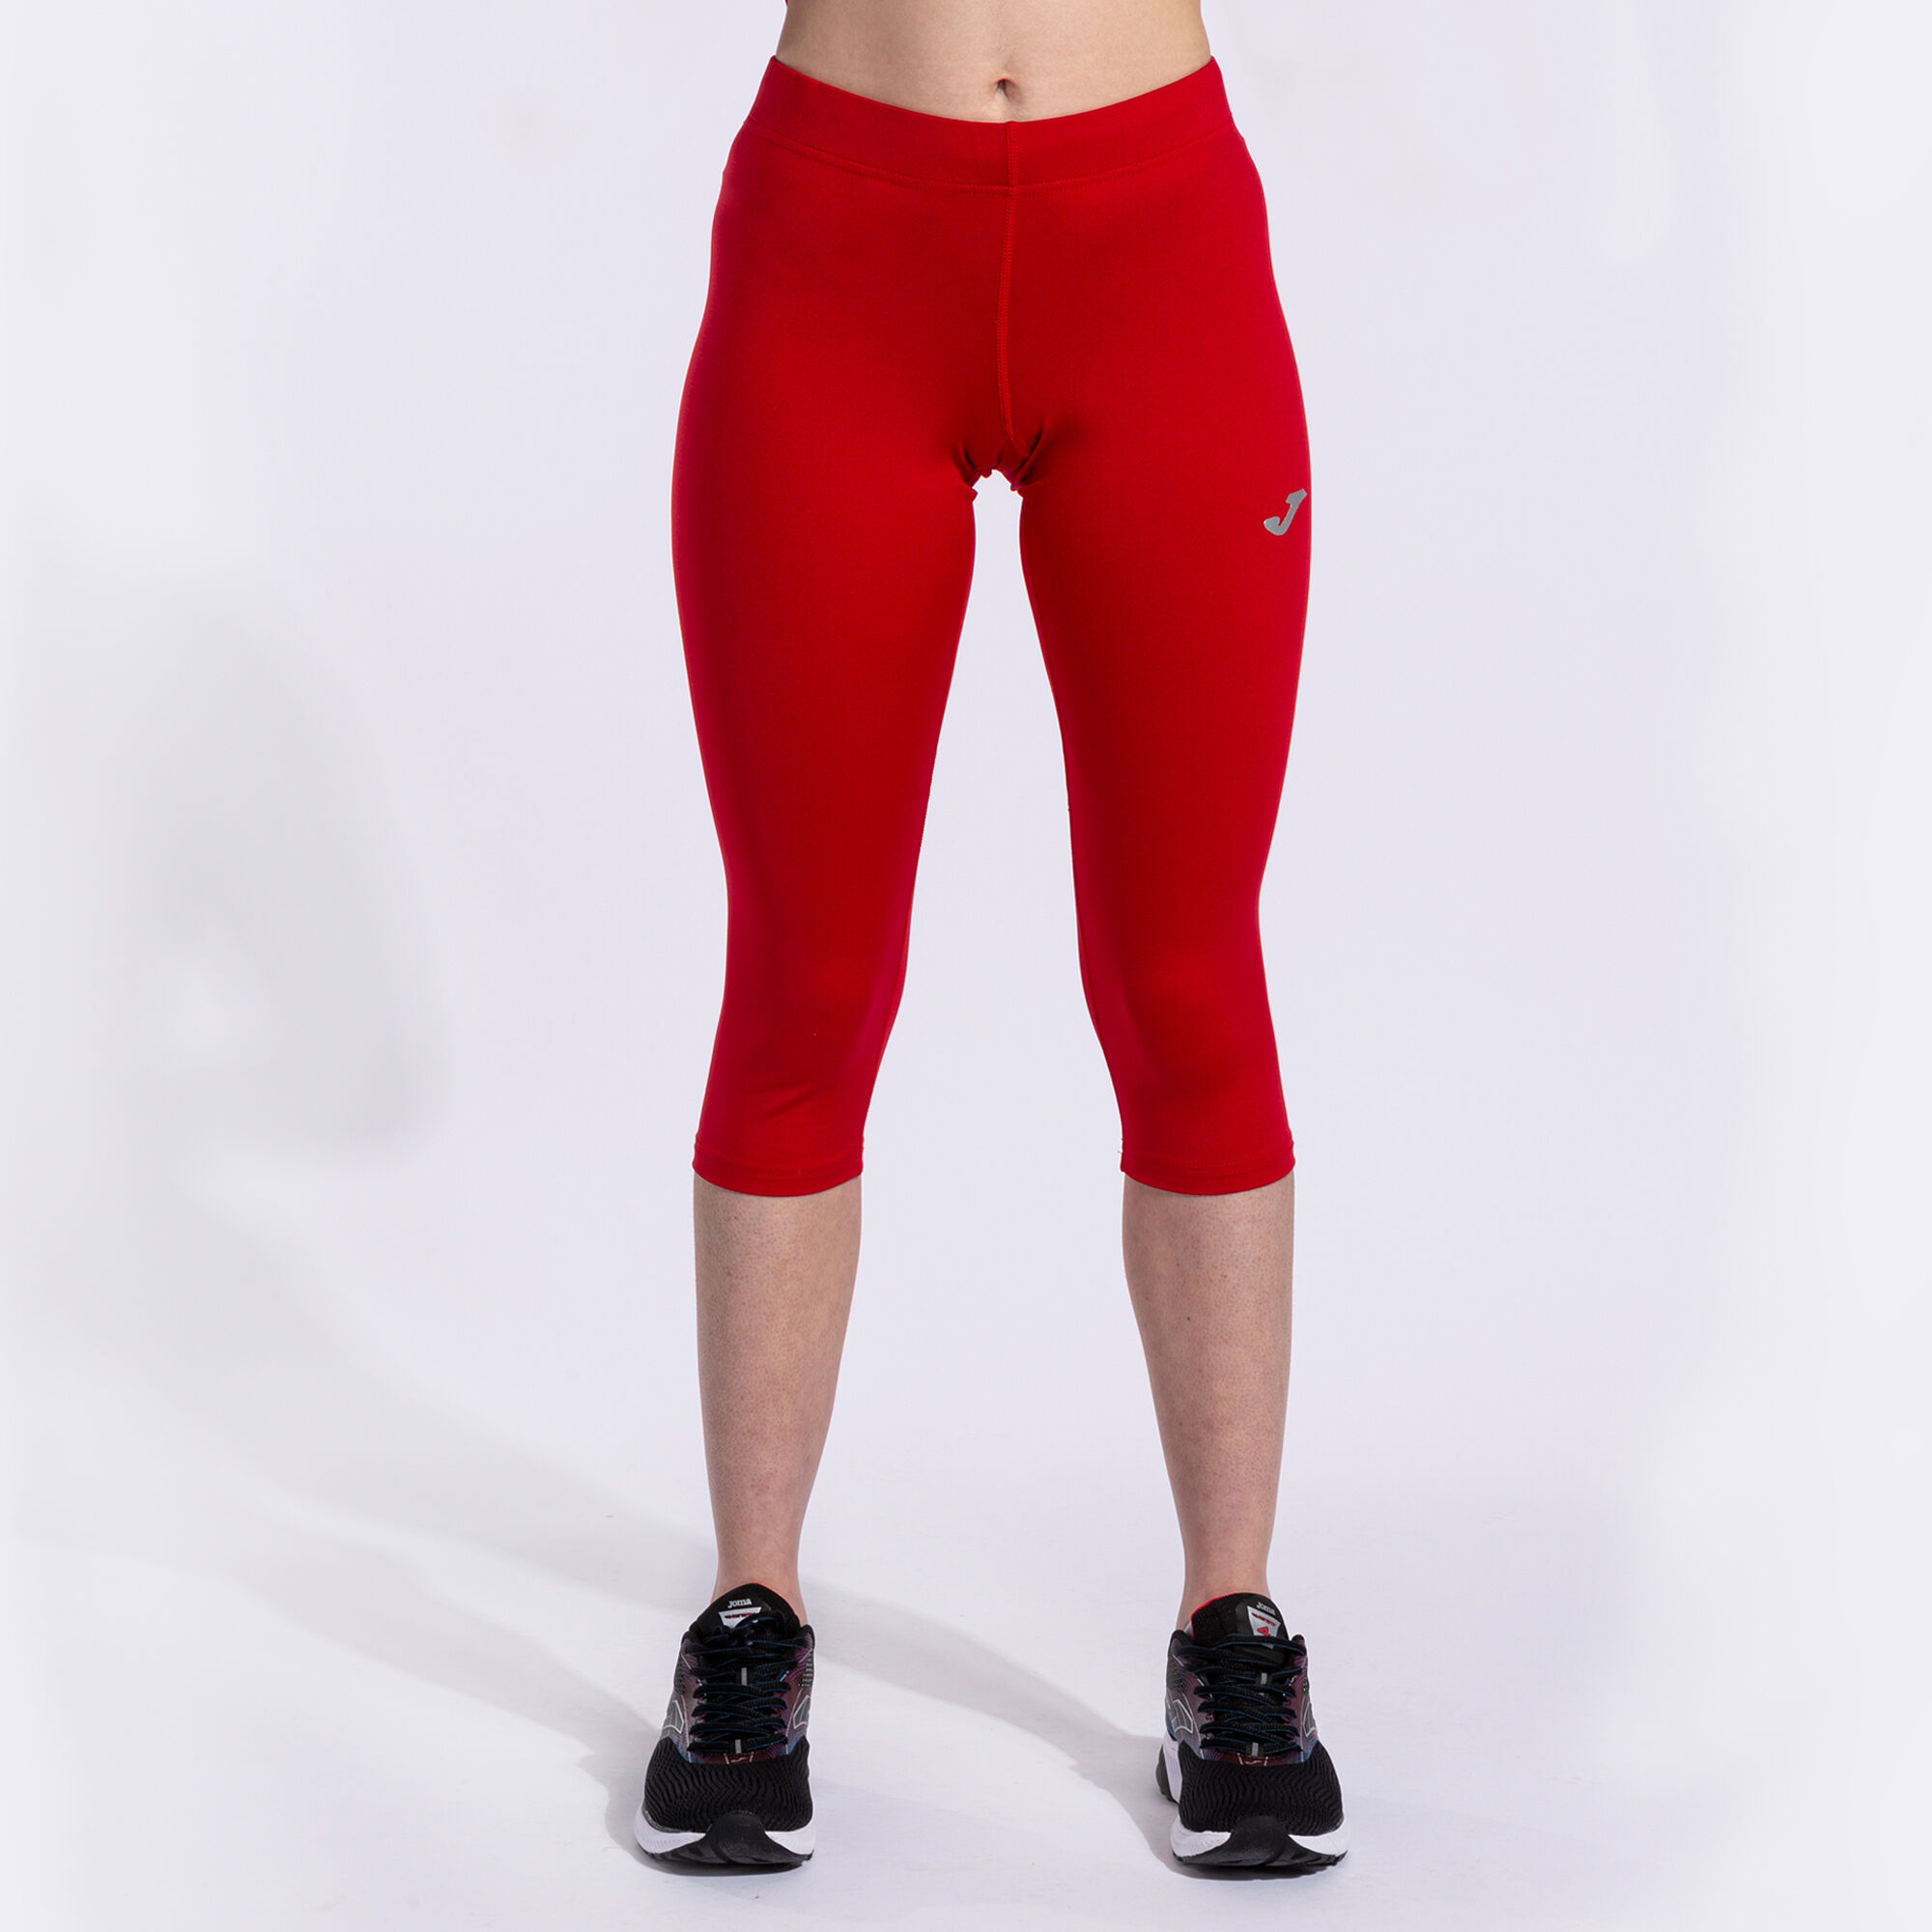 3/4 TIGHTS WOMAN OLIMPIA RED